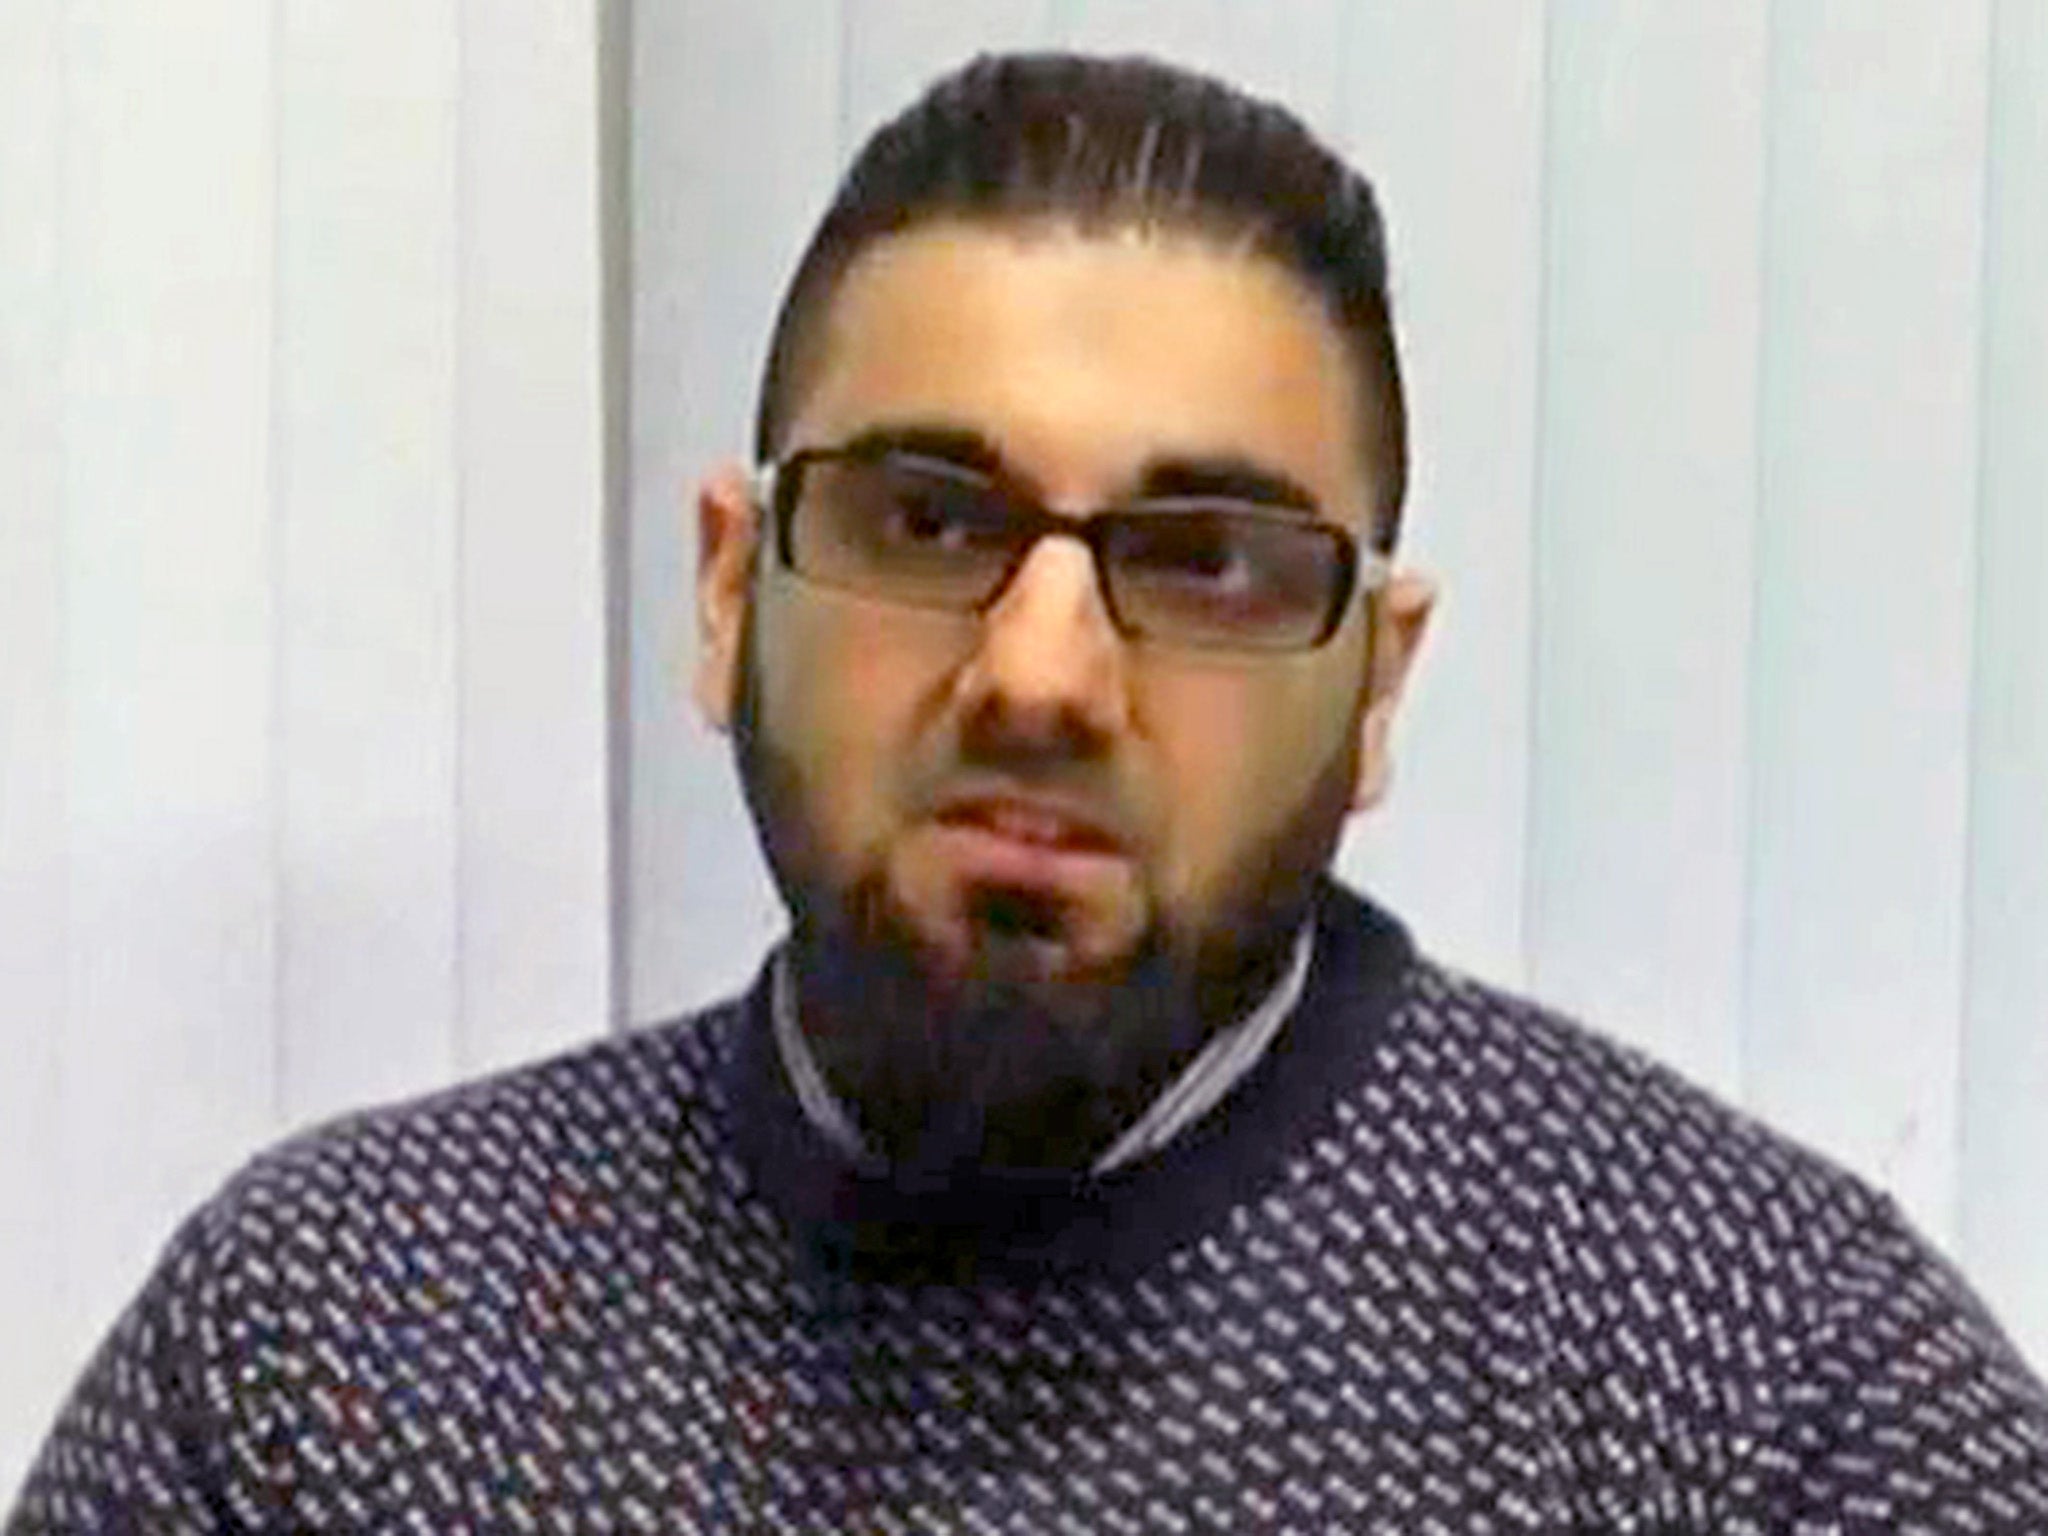 Usman Khan murdered two people in a terrorist rampage at Fishmongers’ Hall in November 2019